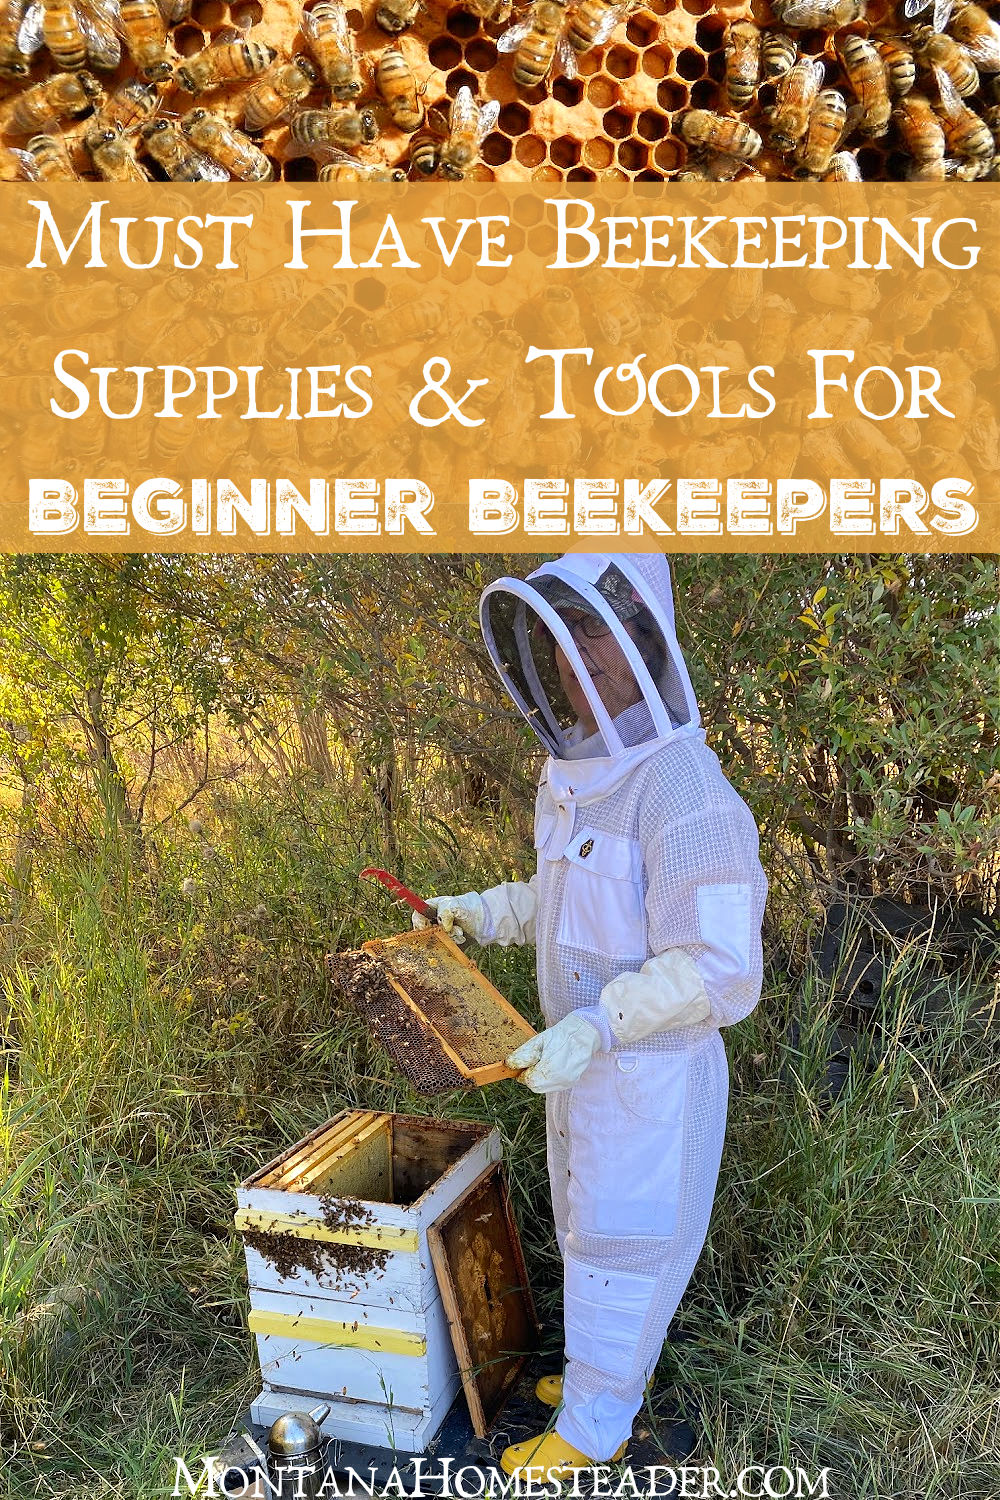 10 Tips for New Beekeepers